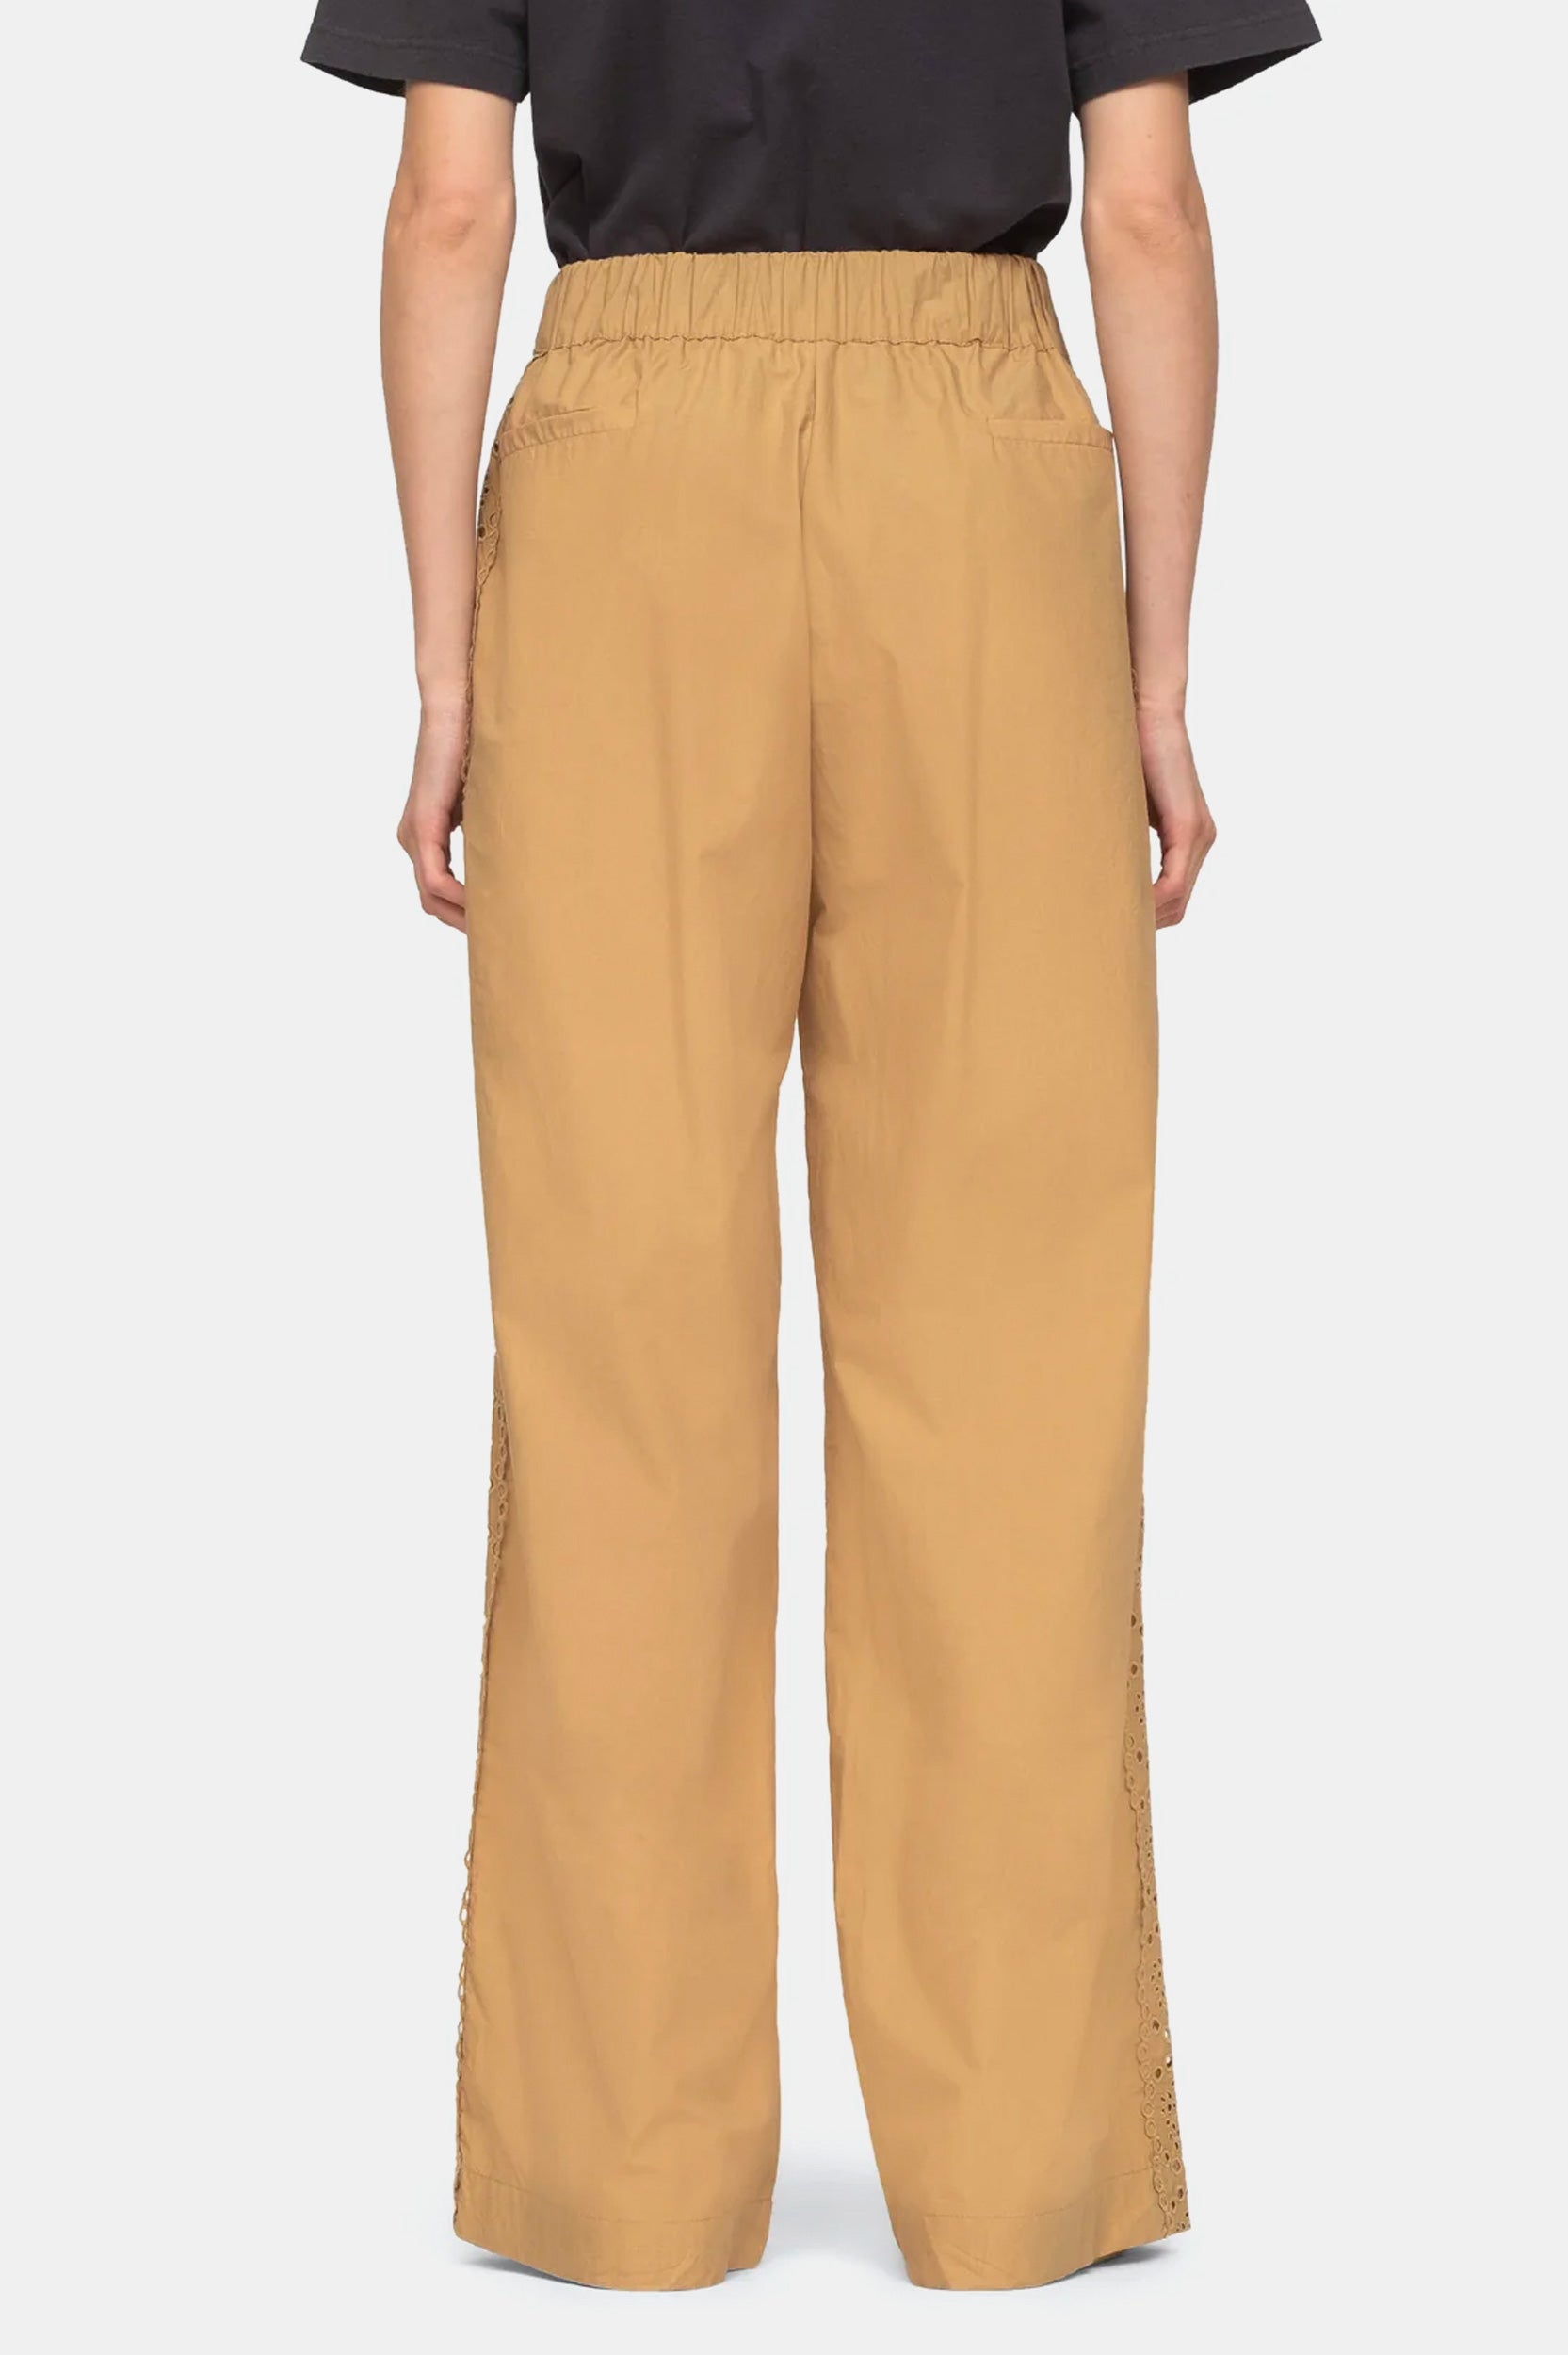 Maeve Eyelet Trim Pants in Chino